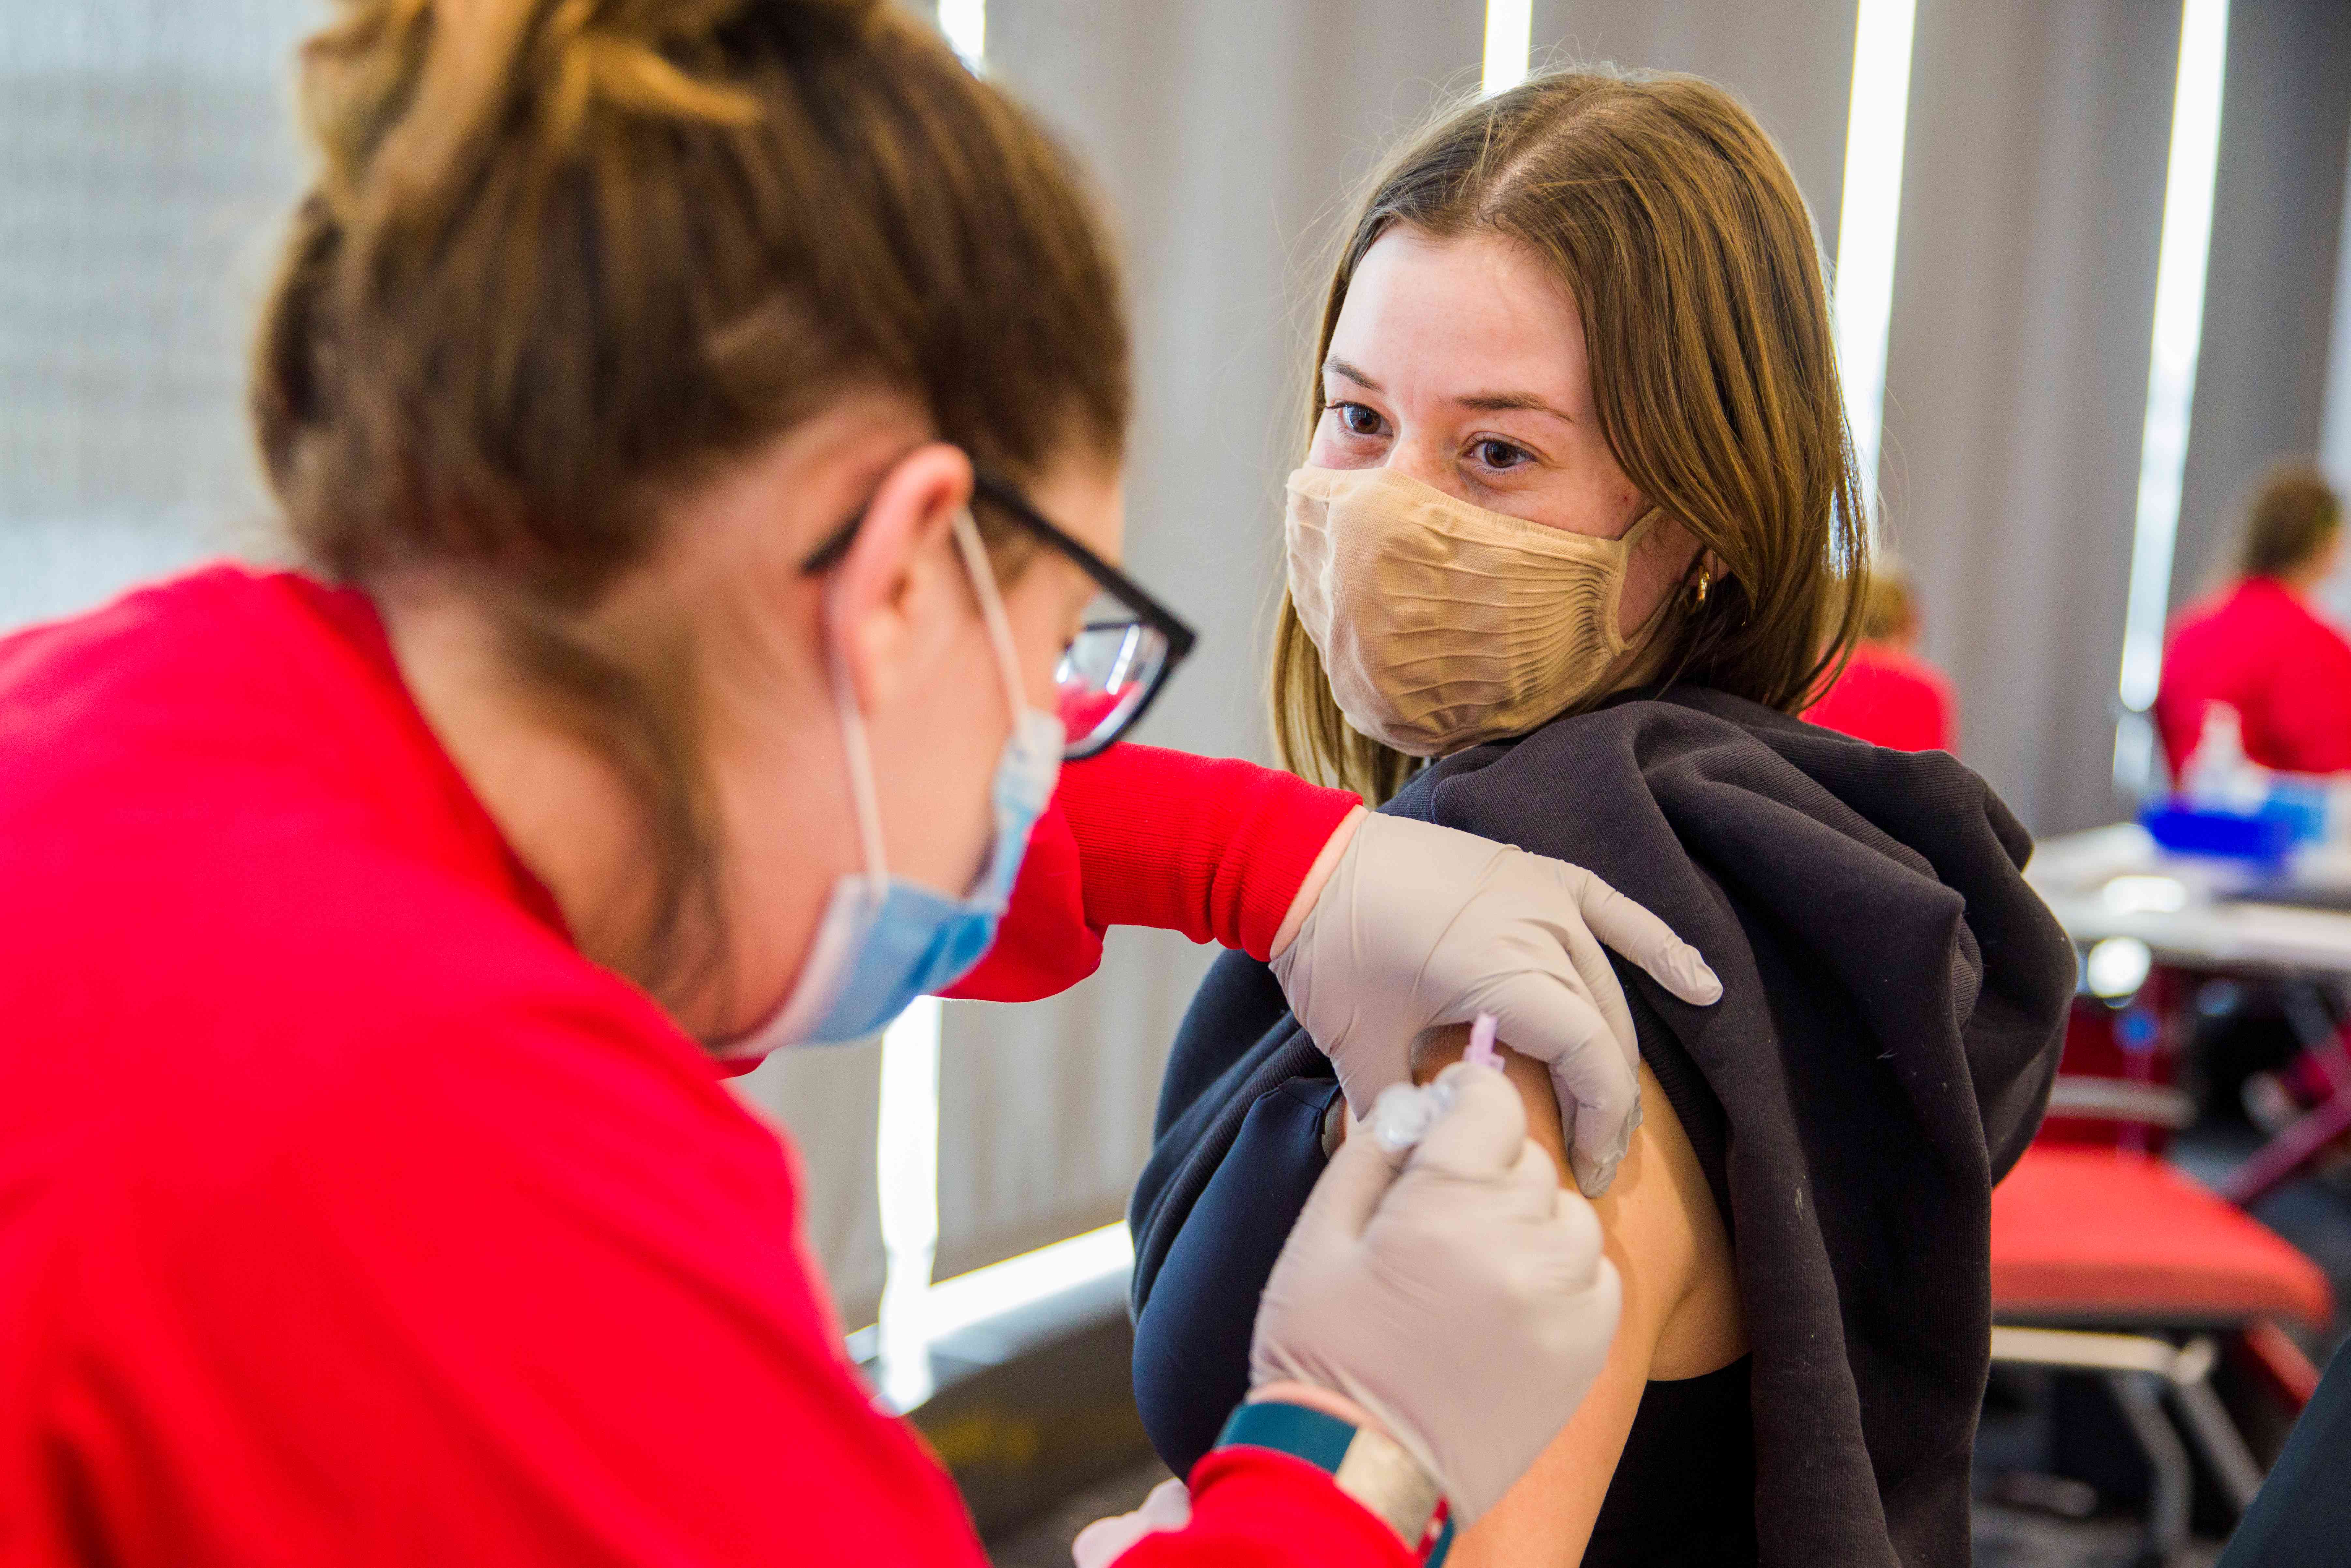 A UNMC student gives a vaccine to a fellow student.